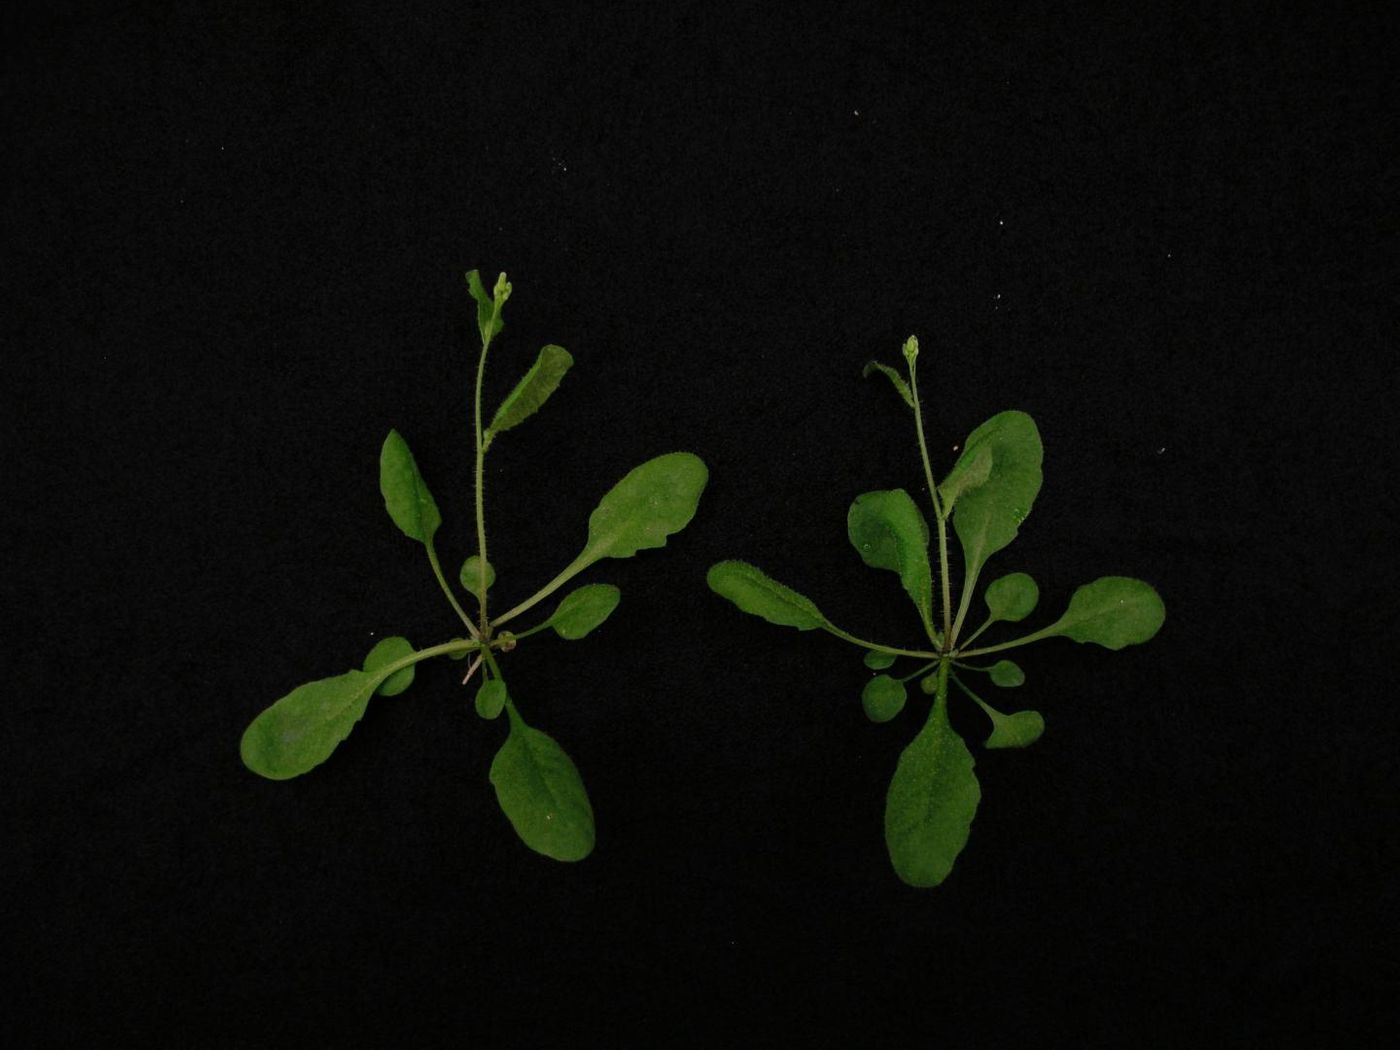 Arabidopsis plants were used to test the first CRISPR-Cas9-based gene drive in plants. / Credit: Zhao Lab, UC San Diego